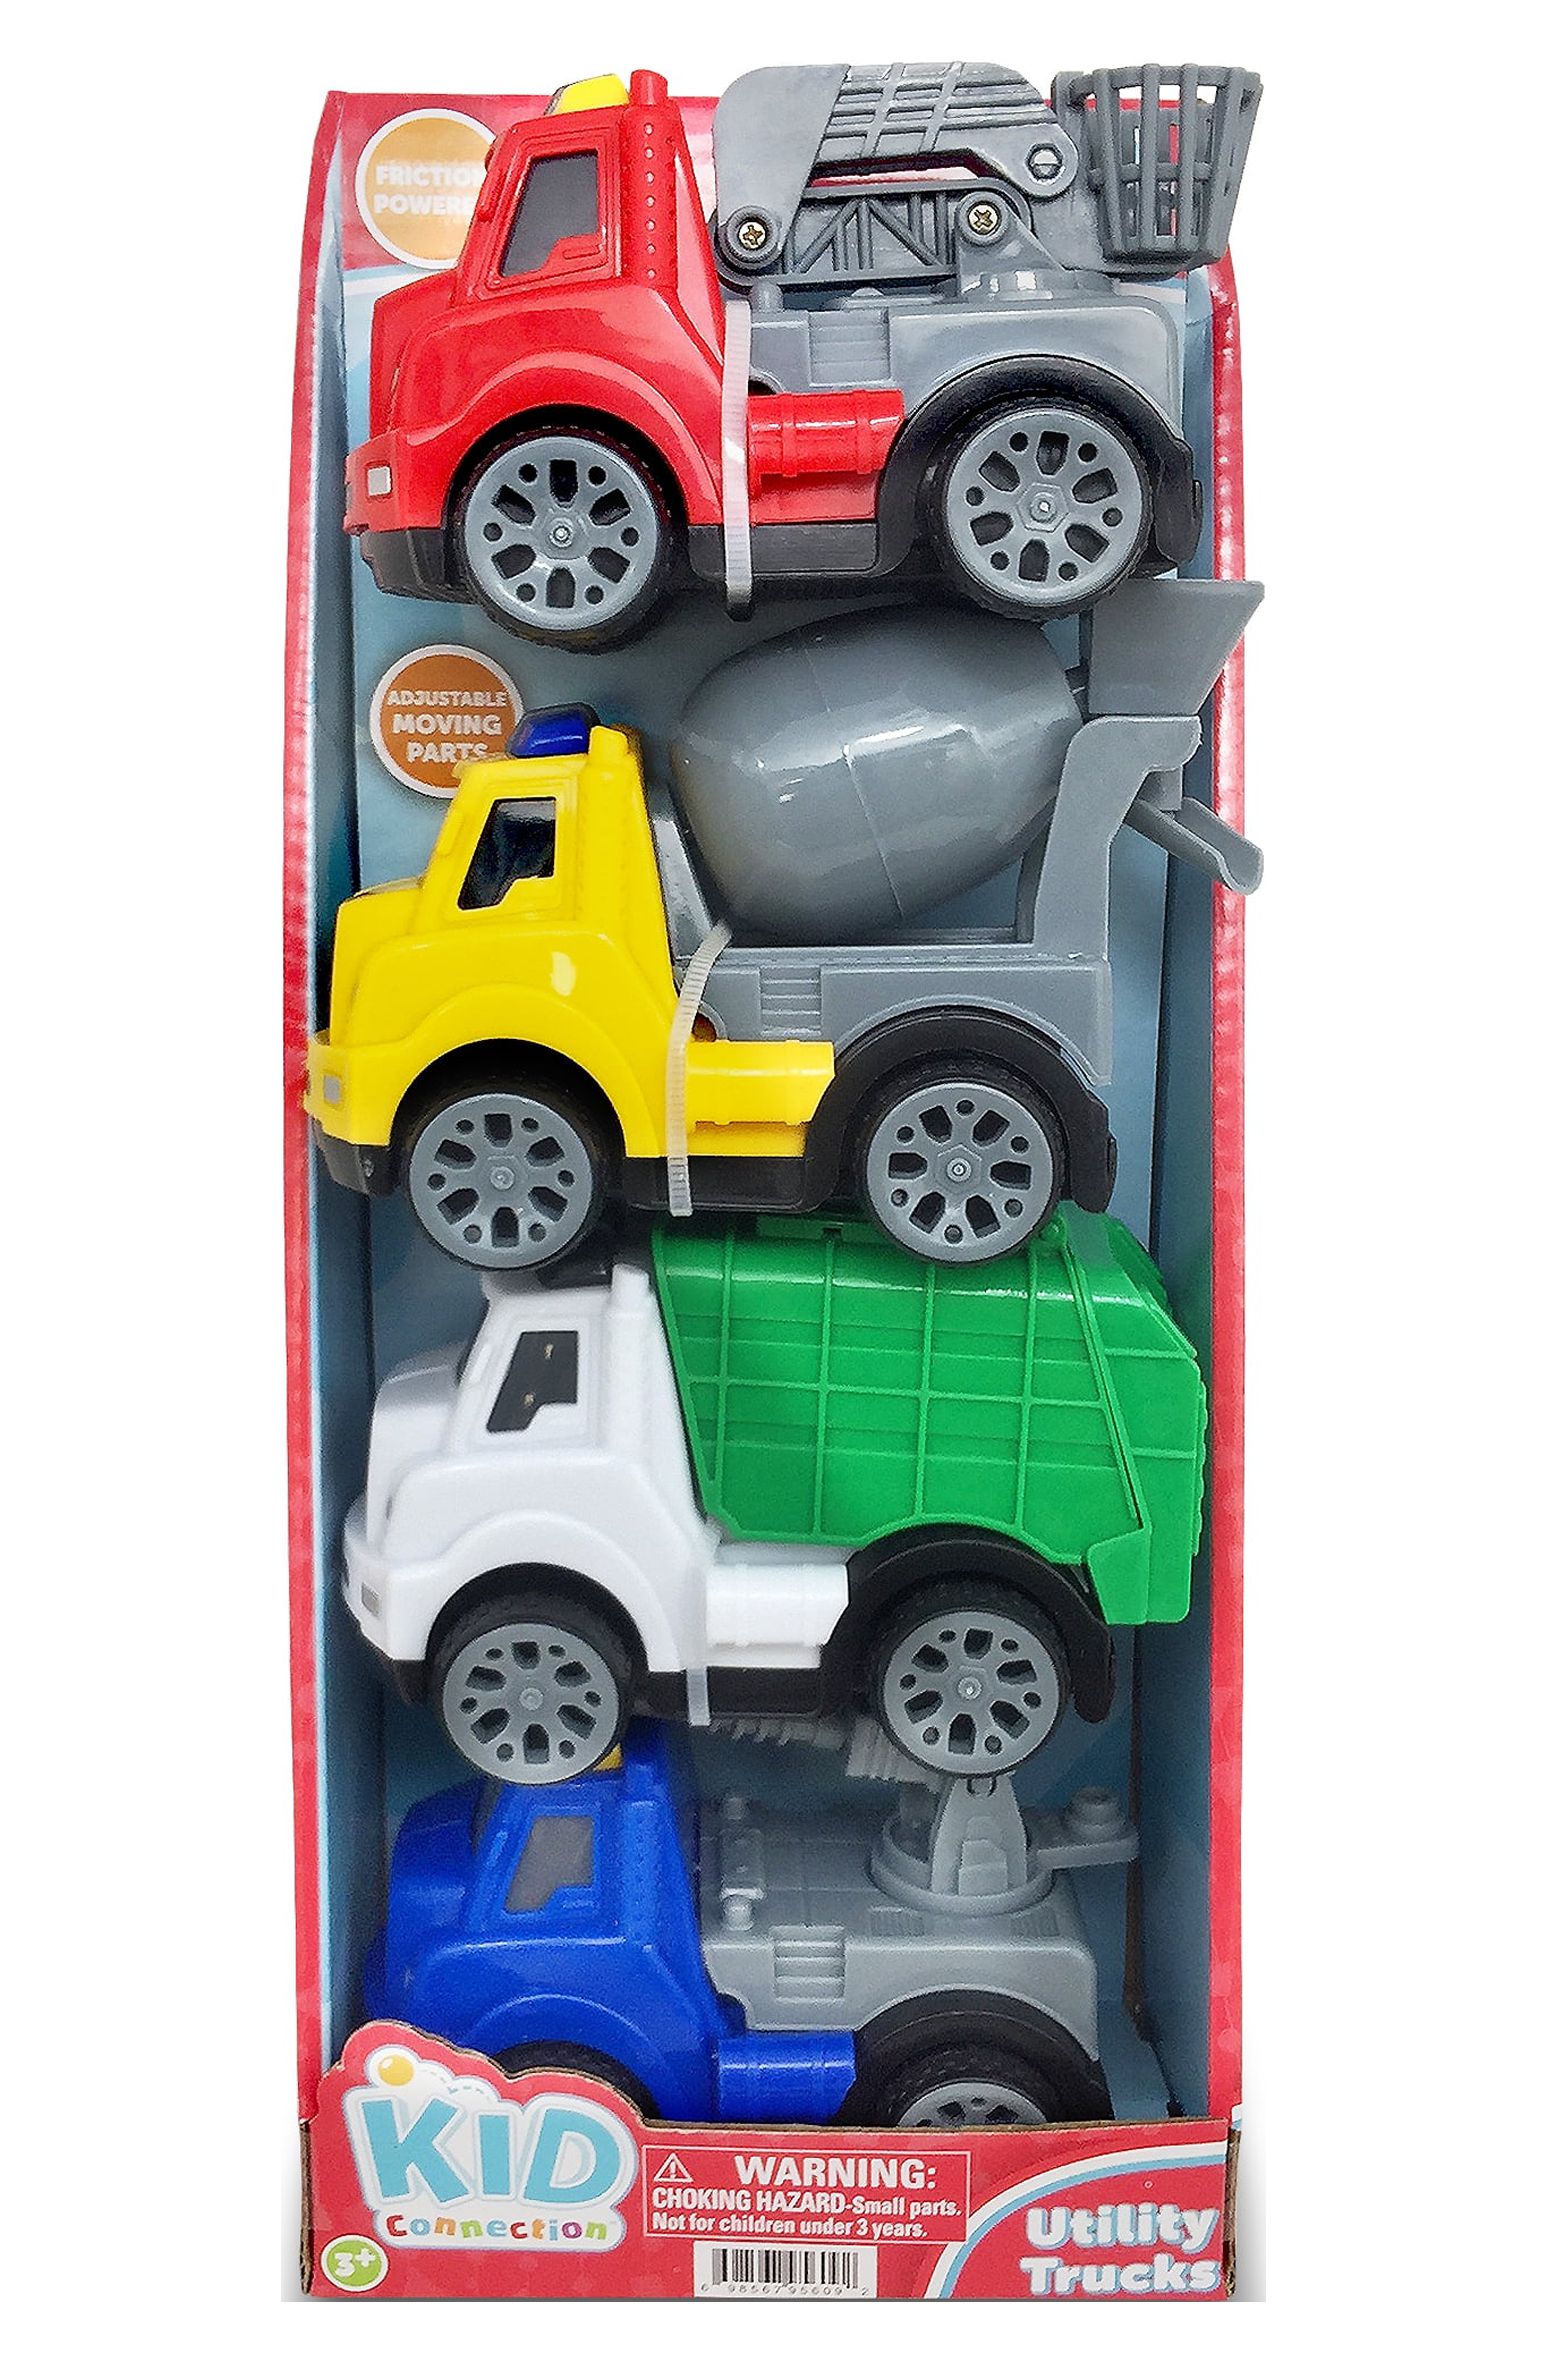 Kid Connection Friction Powered Utility Trucks Play Set, 4 Pieces - image 5 of 6